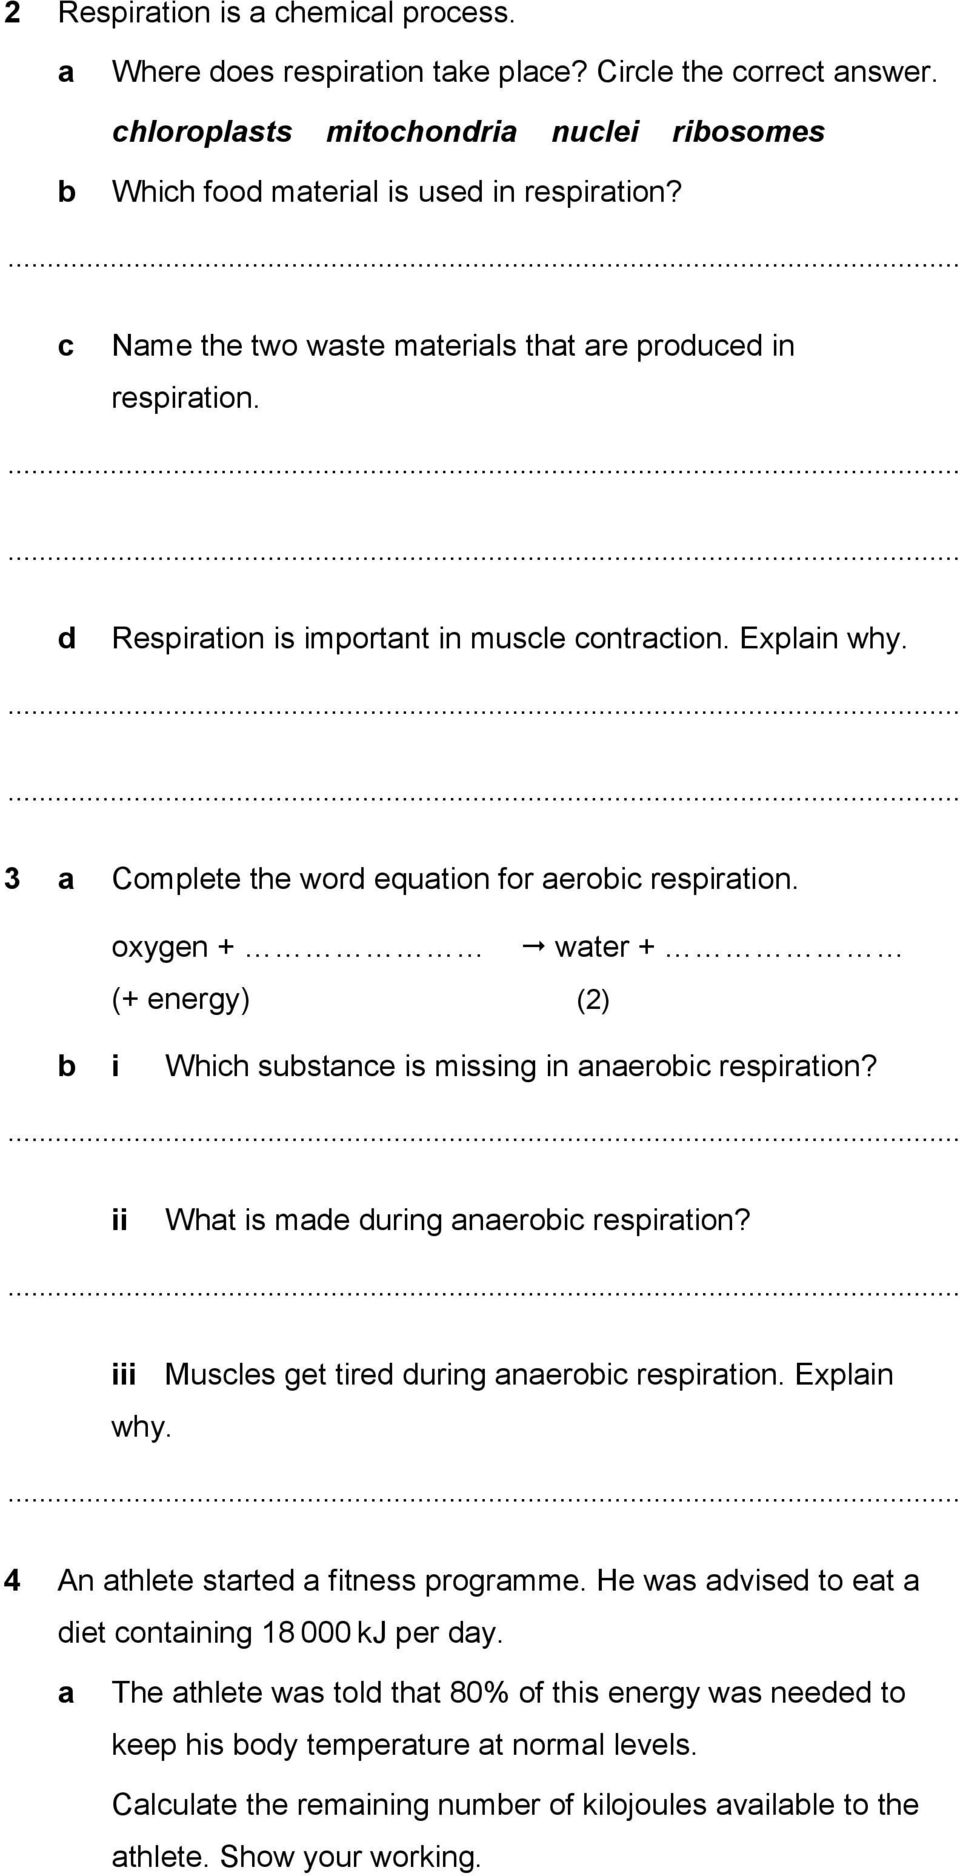 oxygen + water + (+ energy) () b i Which substance is missing in anaerobic respiration? () ii What is made during anaerobic respiration? () iii Muscles get tired during anaerobic respiration.